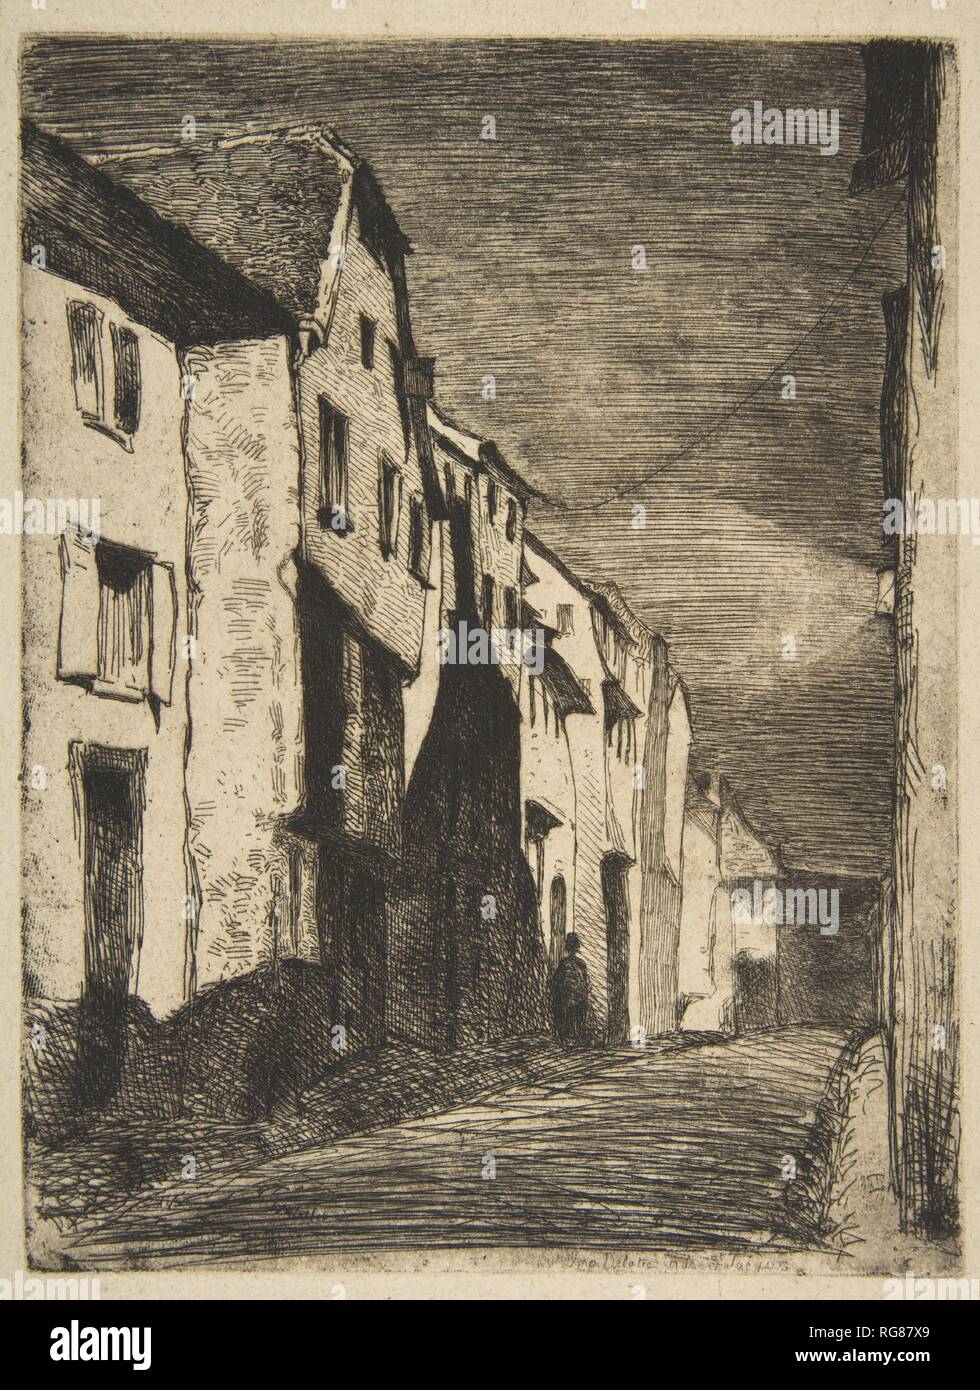 Street at Saverne. Artist: James McNeill Whistler (American, Lowell, Massachusetts 1834-1903 London). Dimensions: Plate: 8 1/8 × 6 1/8 in. (20.6 × 15.6 cm)  Sheet: 12 15/16 × 9 1/8 in. (32.9 × 23.2 cm). Series/Portfolio: French Set ('Douze eau-fortes d'apres Nature' 1858). Date: 1858. Museum: Metropolitan Museum of Art, New York, USA. Stock Photo